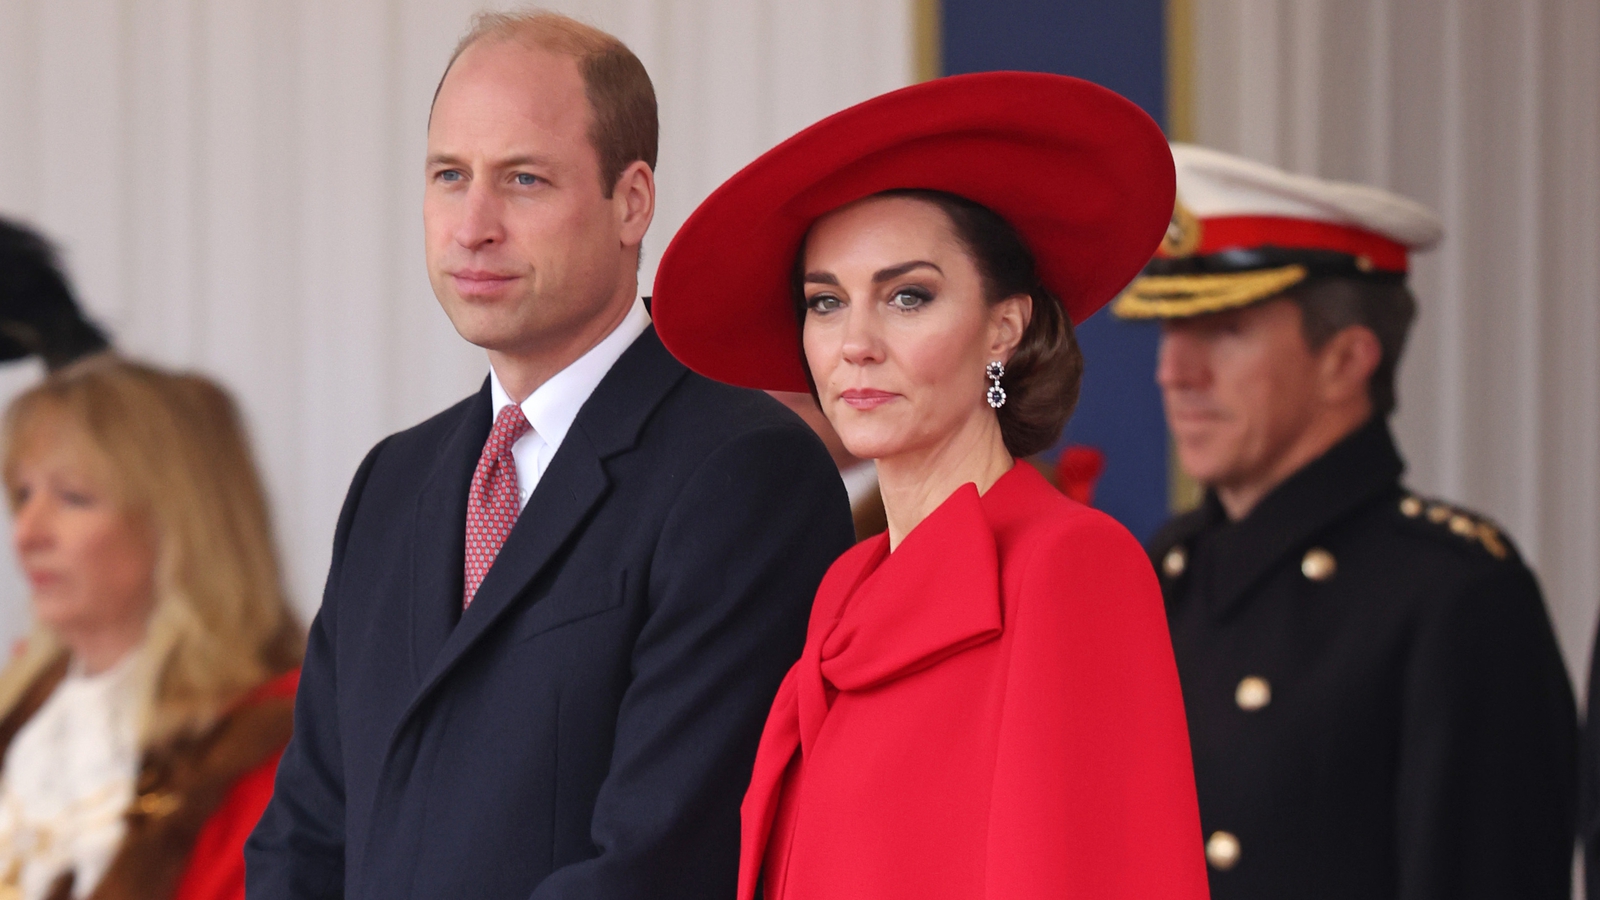 Kate Middleton makes bold statement with dramatic red cape dress